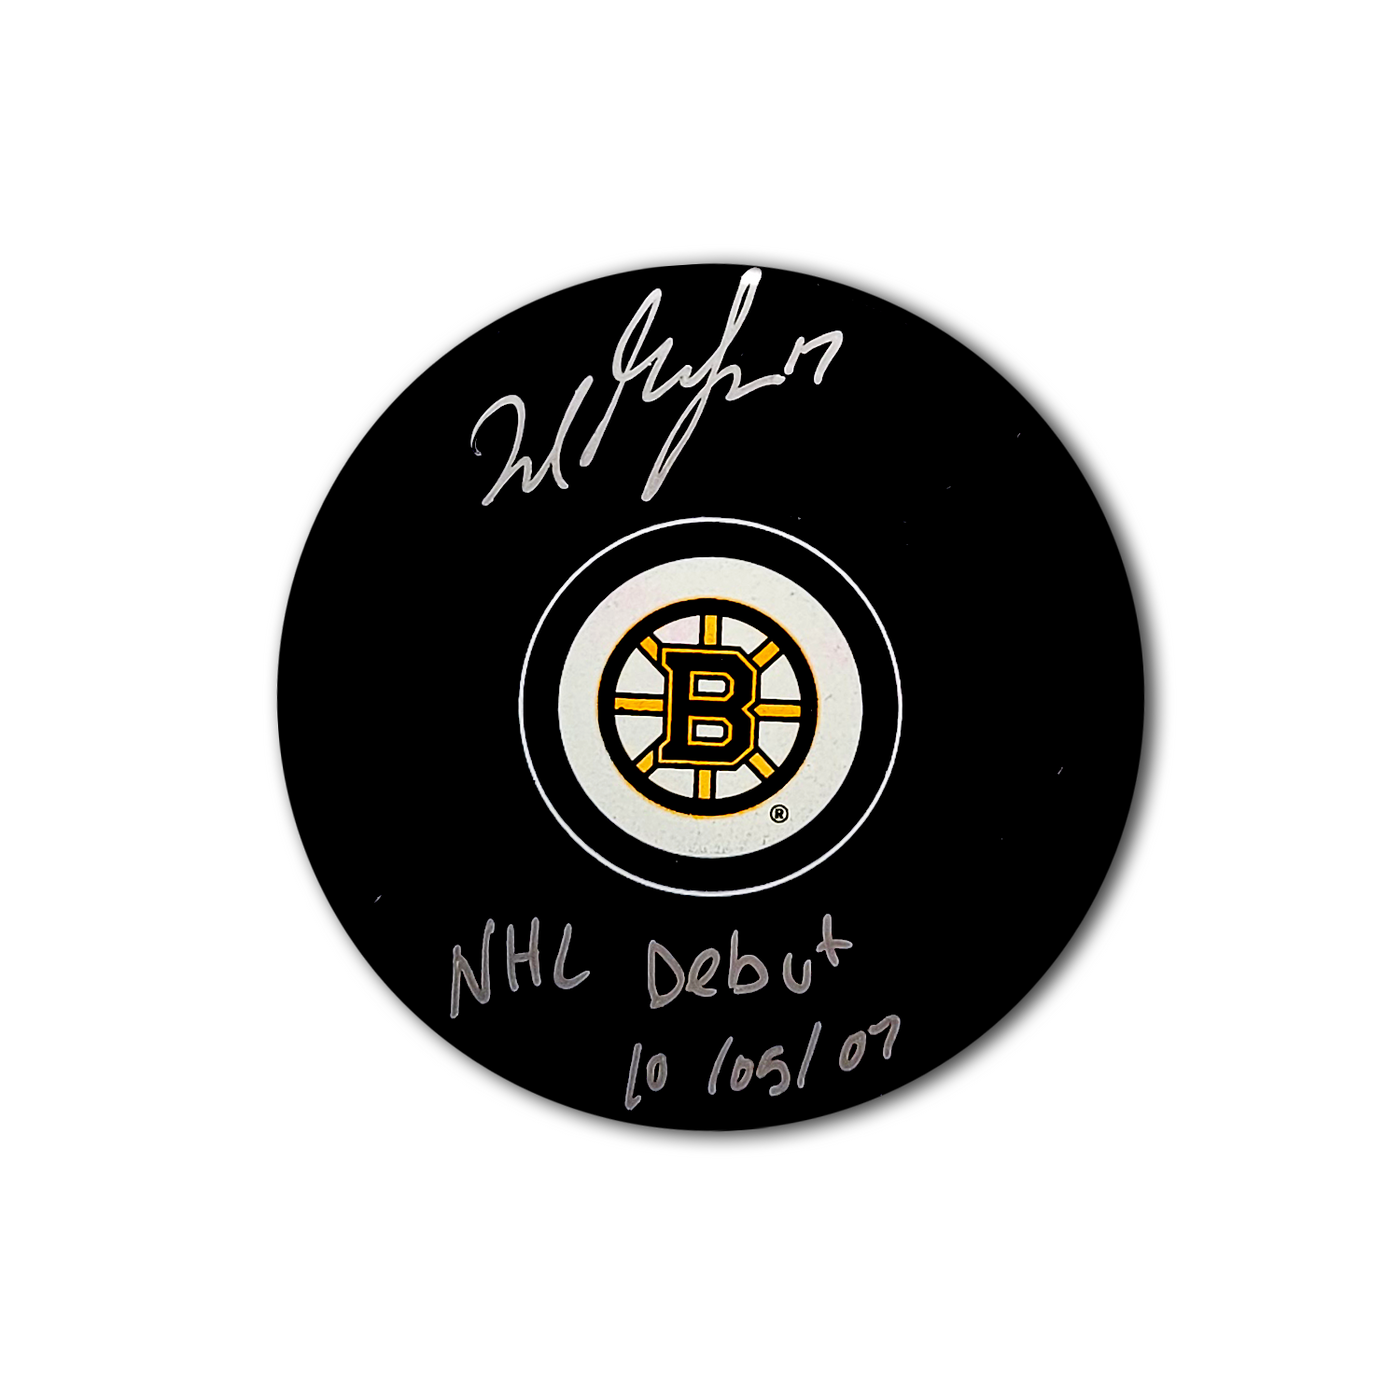 Milan Lucic Boston Bruins Autographed Hockey Puck Inscribed NHL Debut 10/05/07